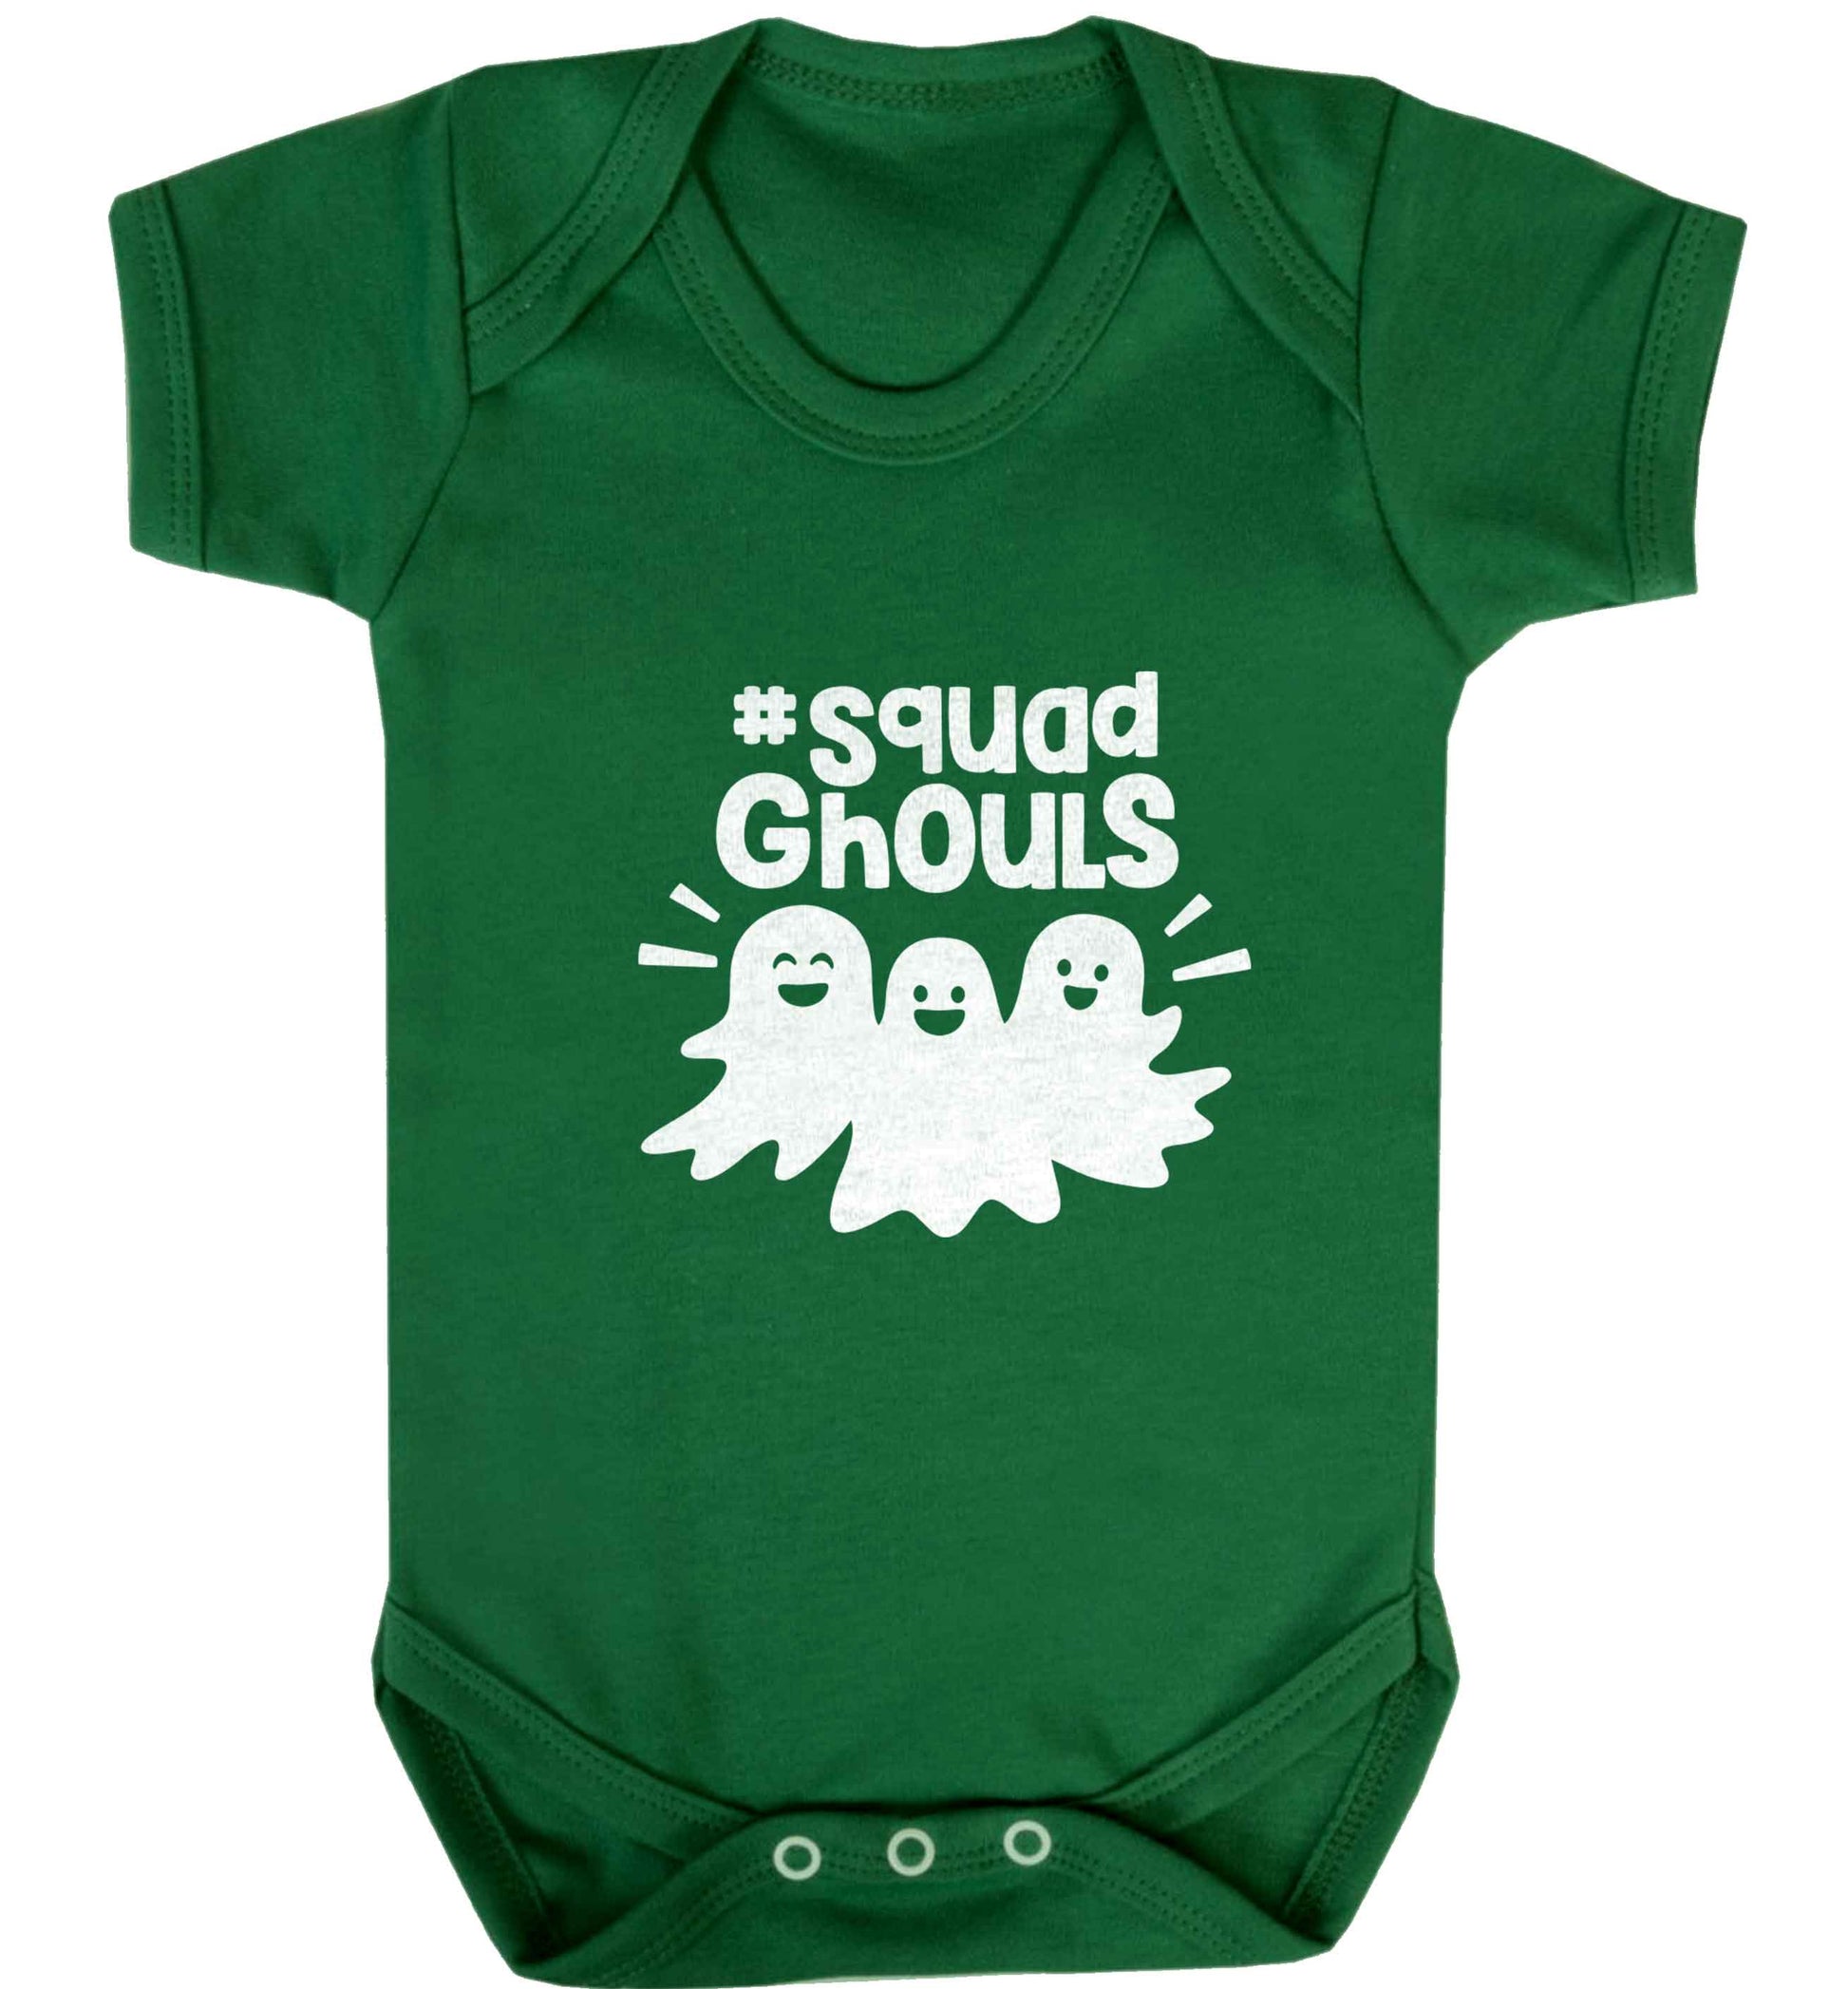 Squad ghouls Kit baby vest green 18-24 months